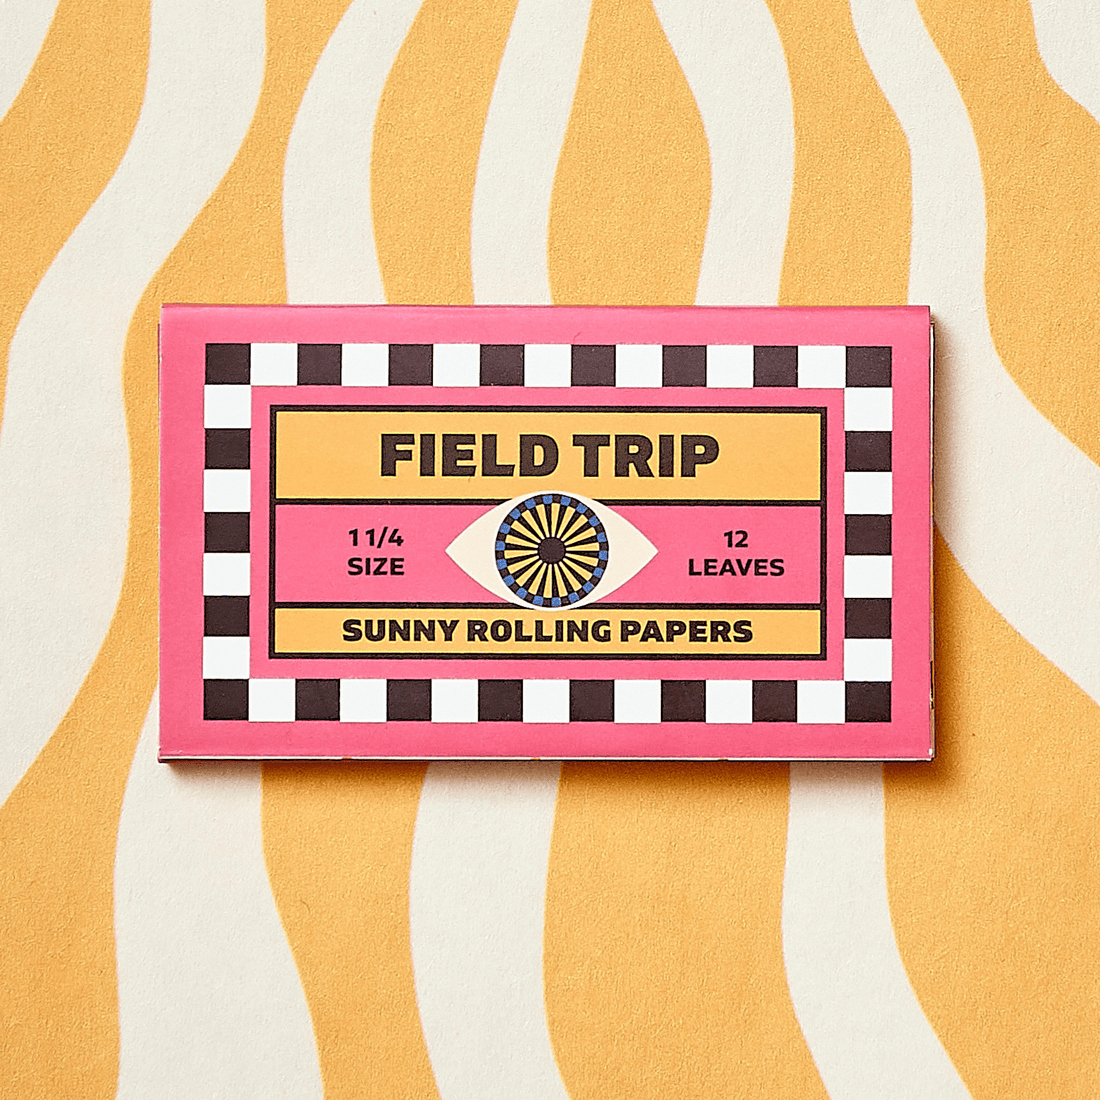 Pack of 12 Sunny Organic Printed Rolling Papers with sunburst pattern, sustainable materials, and organic tips included.